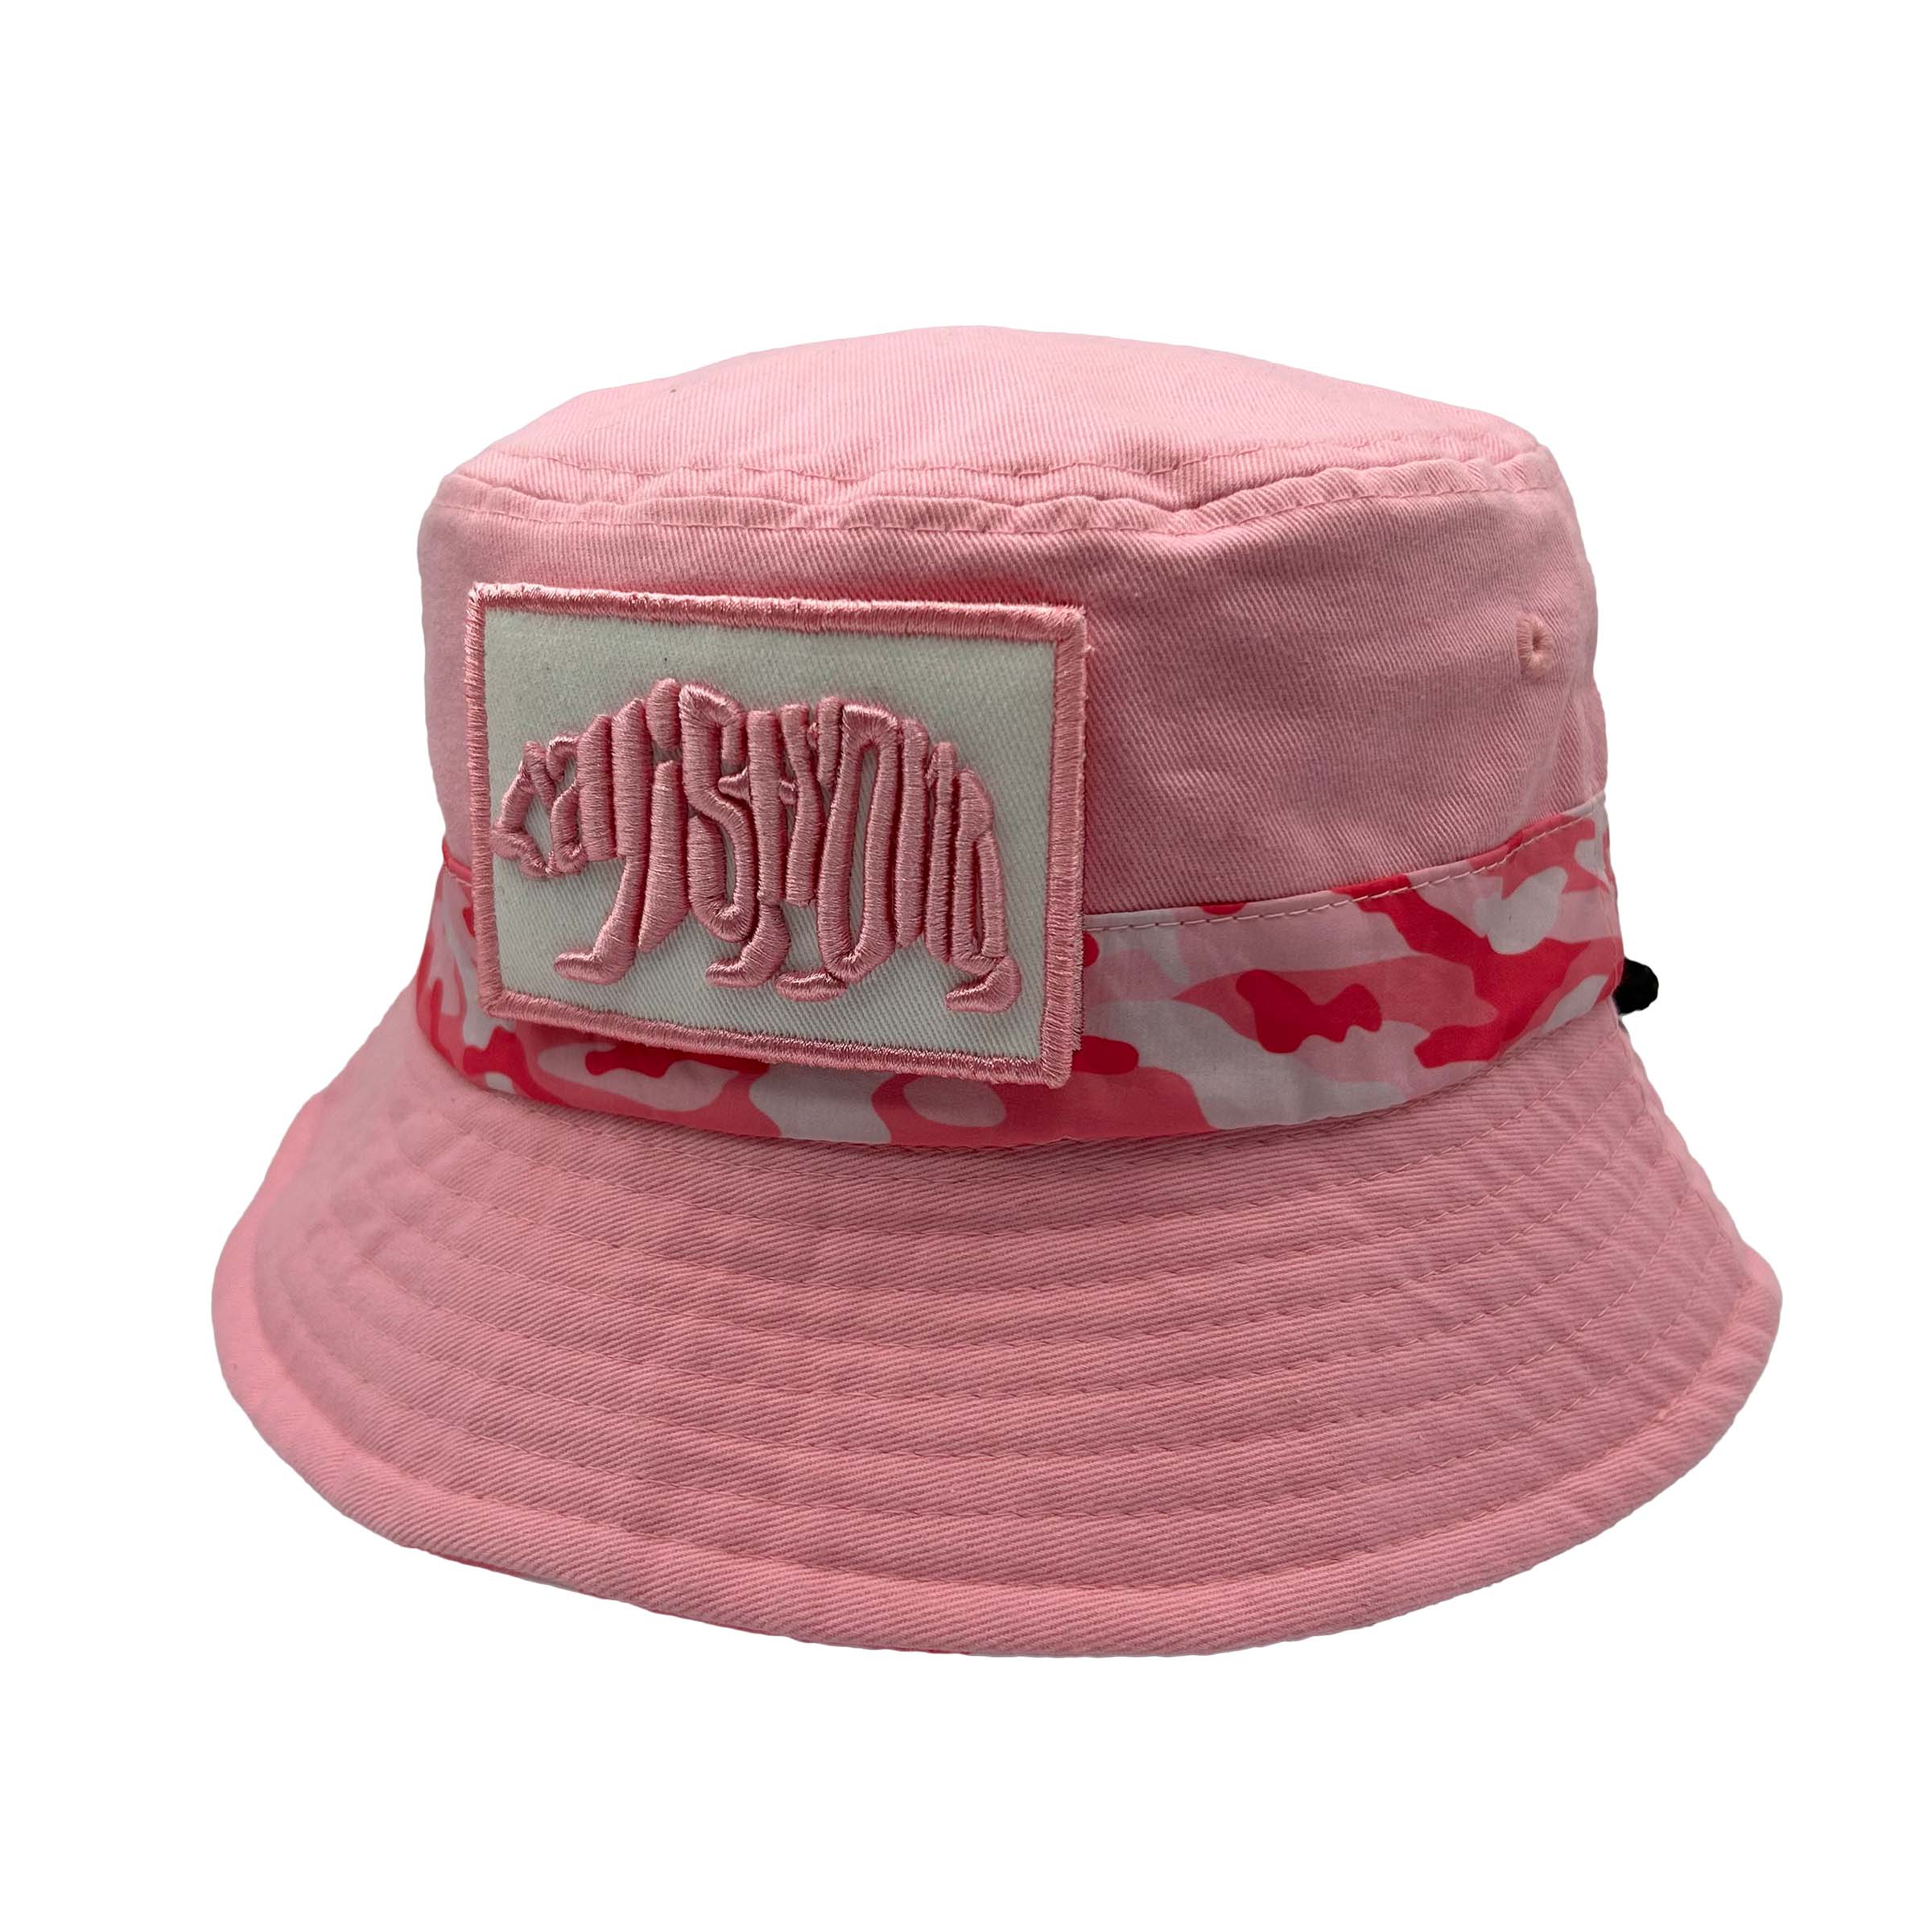 CALI Strong Pink Camo Reversible Bucket Hat Pink Tactical Morale Patch - Bucket Hat - Image 1 - CALI Strong